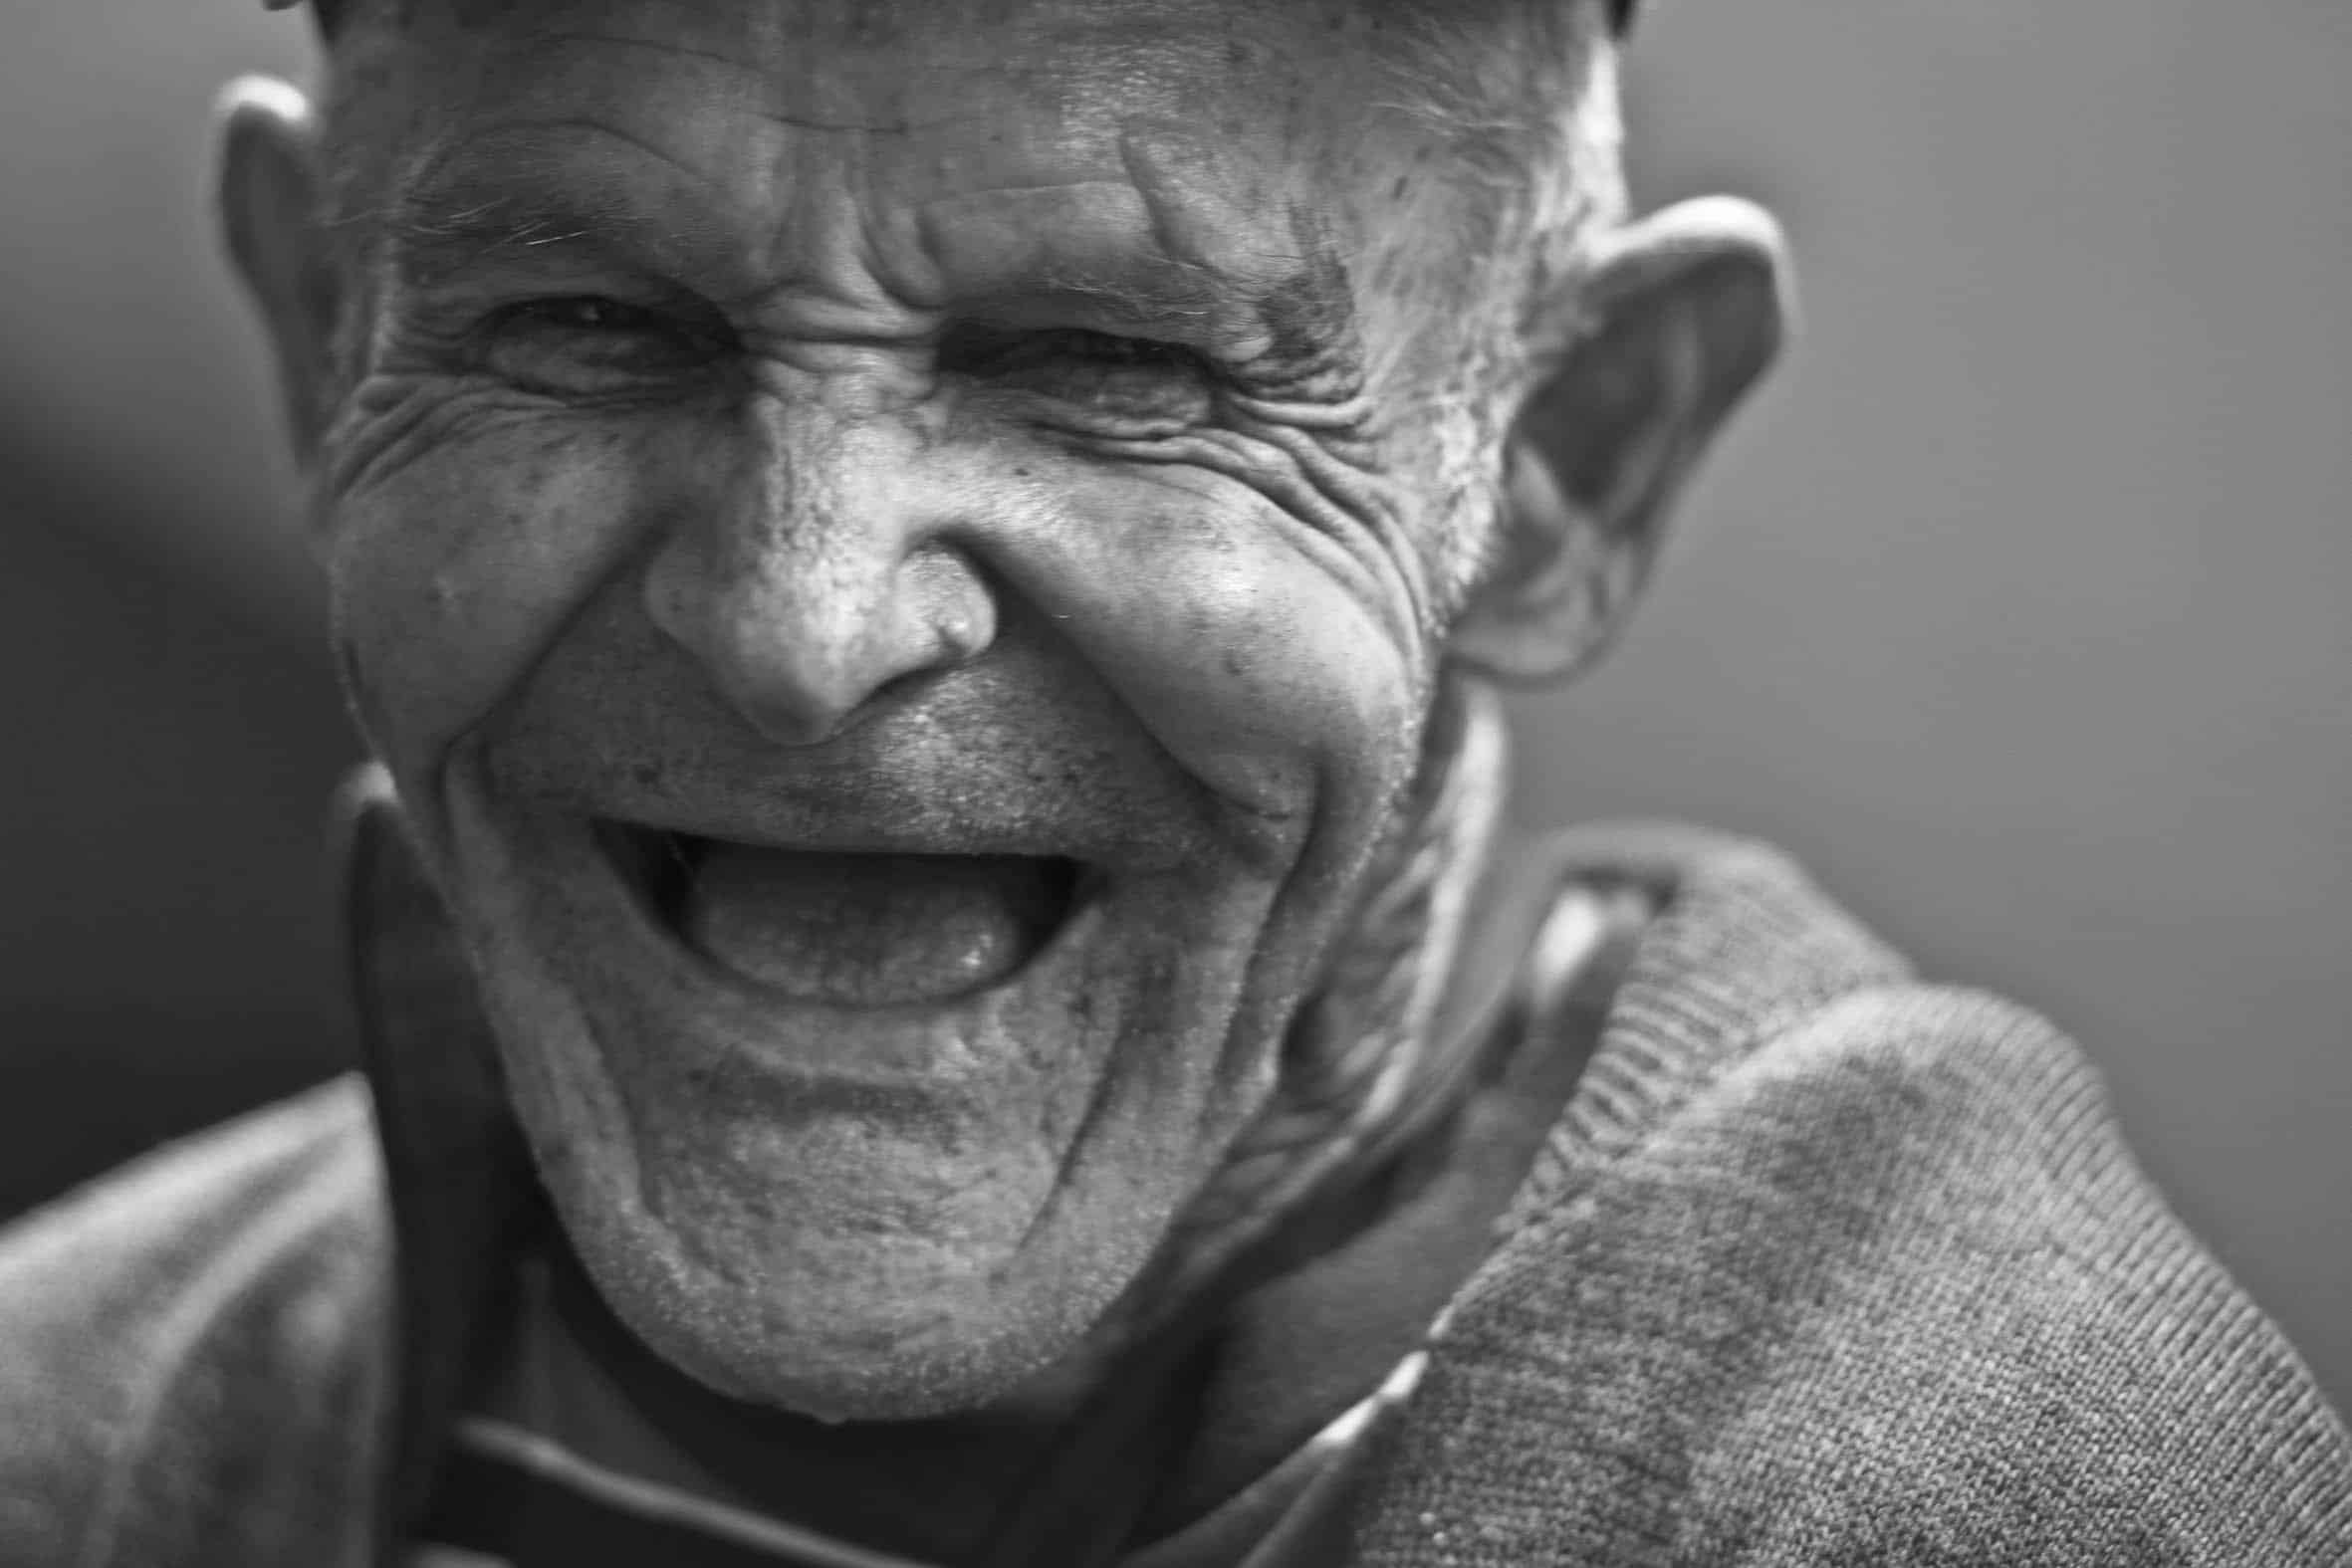 Old white man with no teeth laughing.